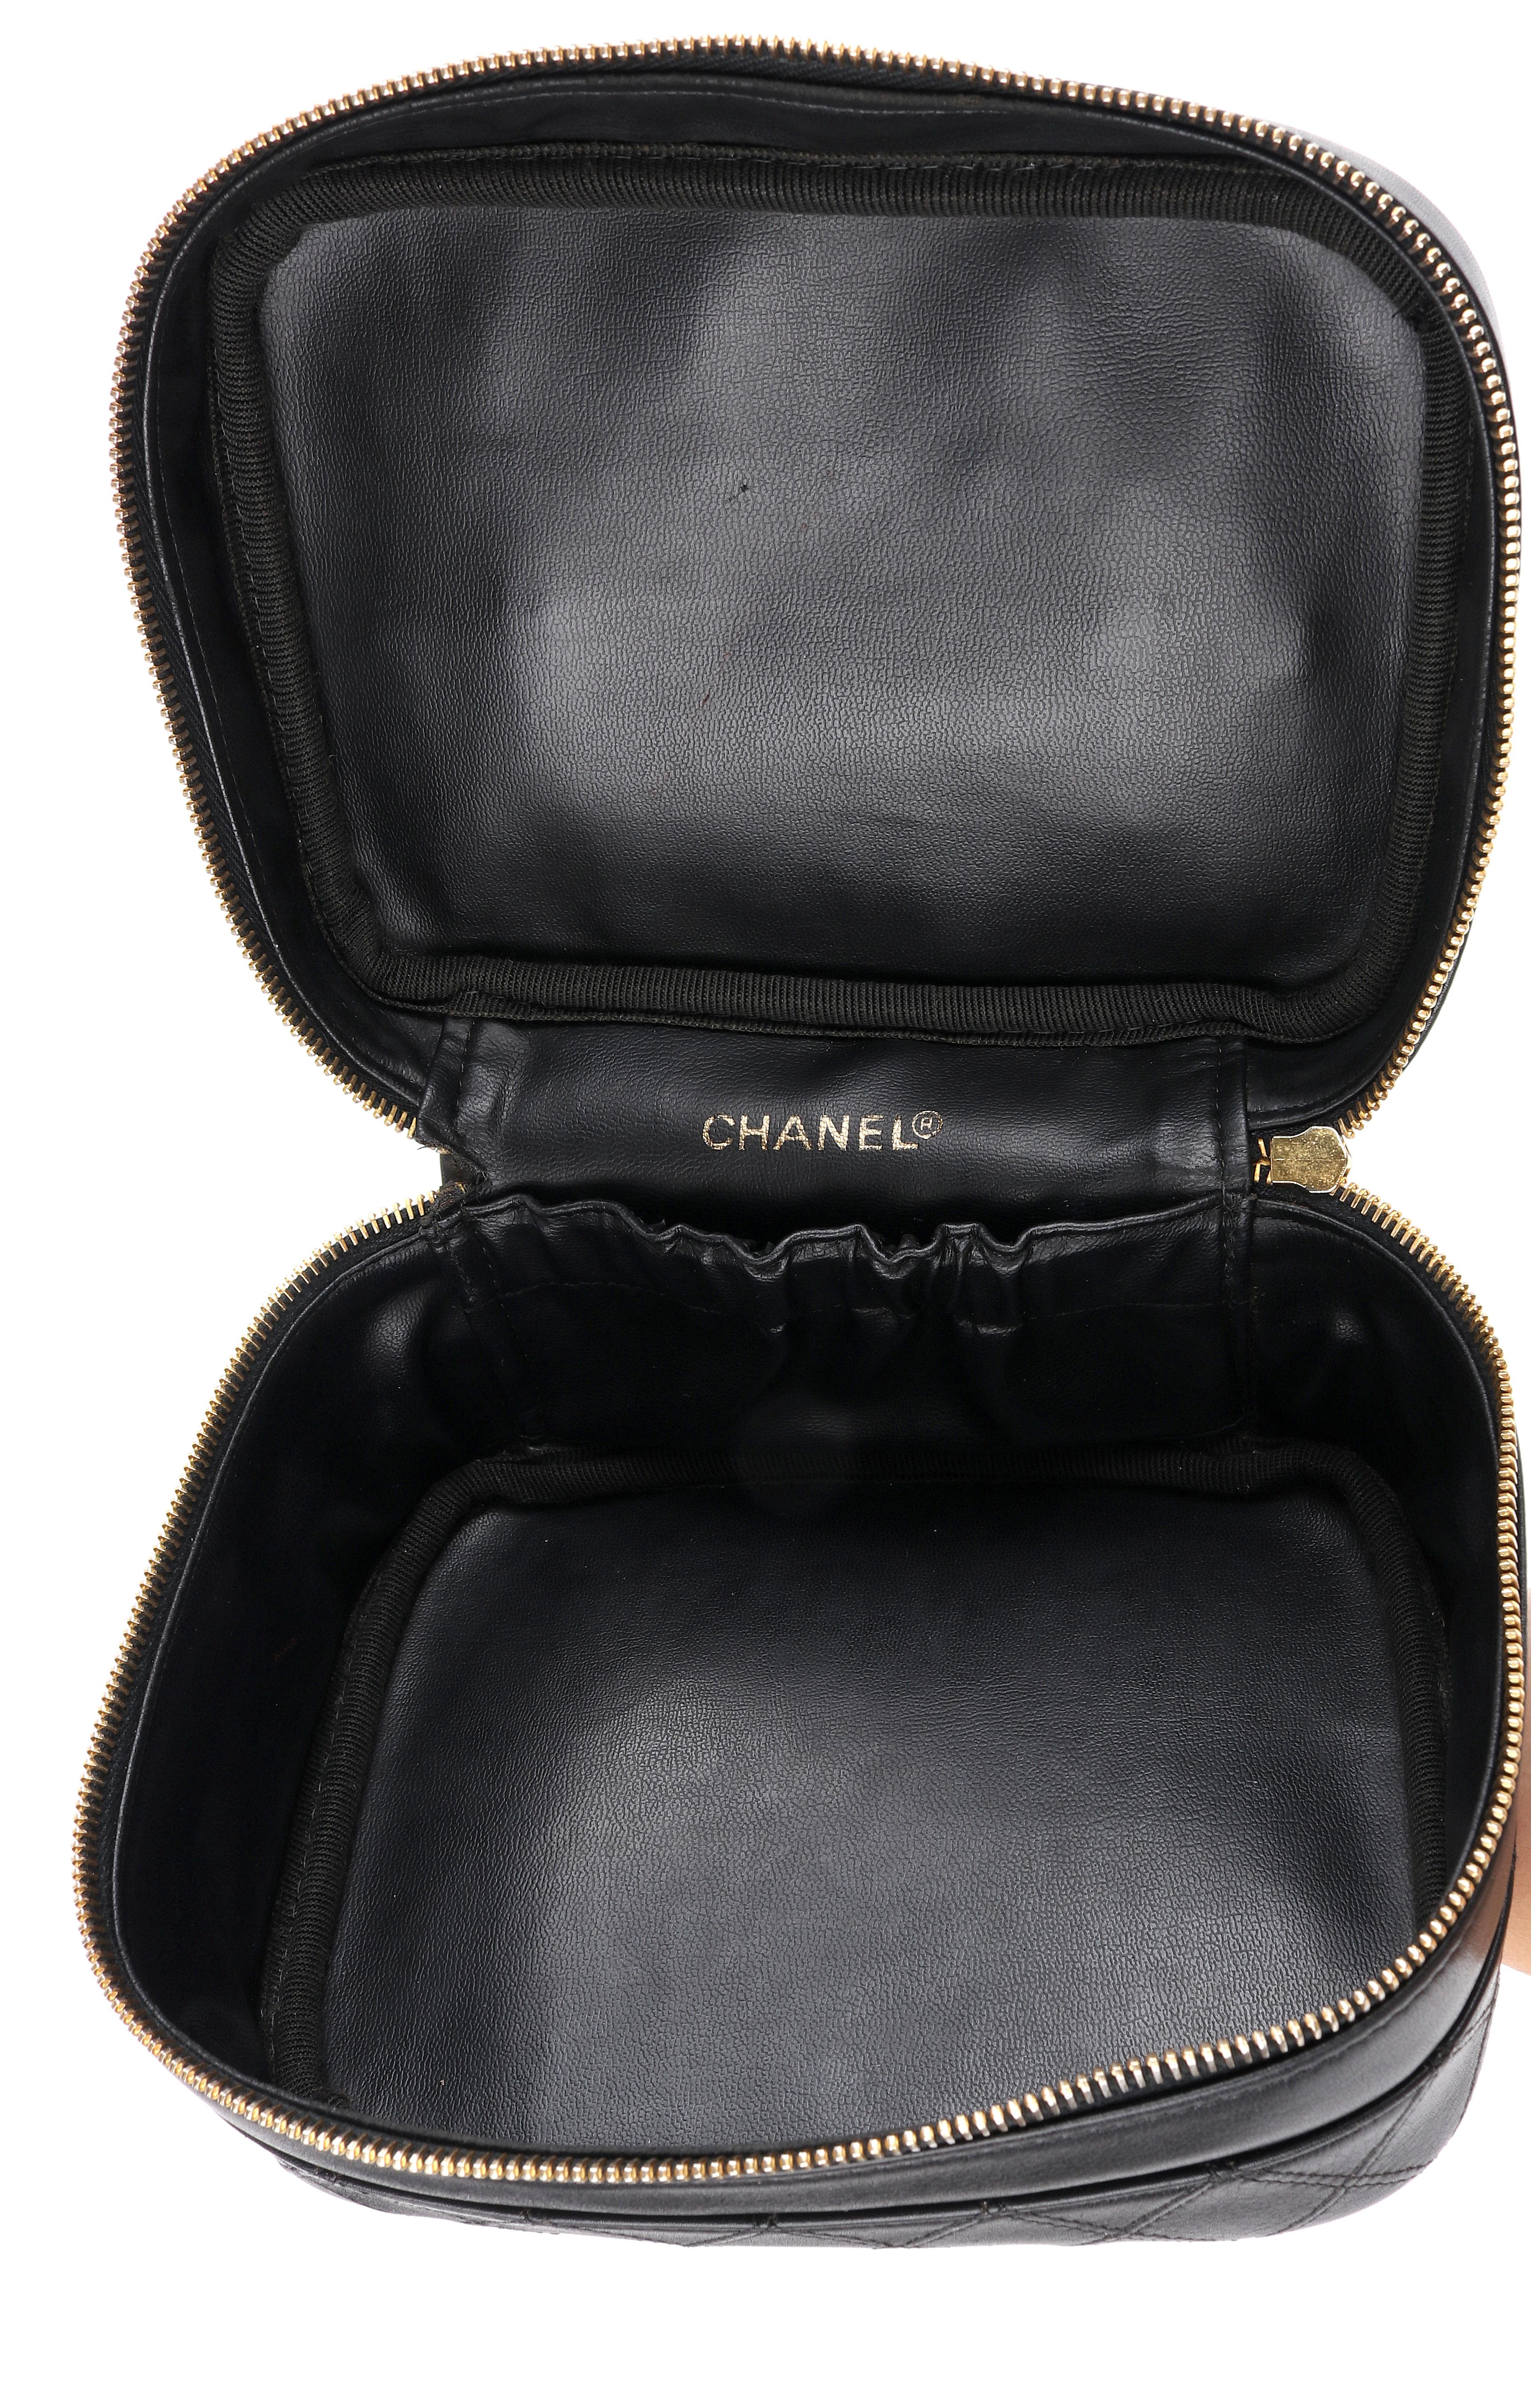 CHANEL c.1990's Black Leather Quilted Zip Around Cosmetic Bag Travel Case 5